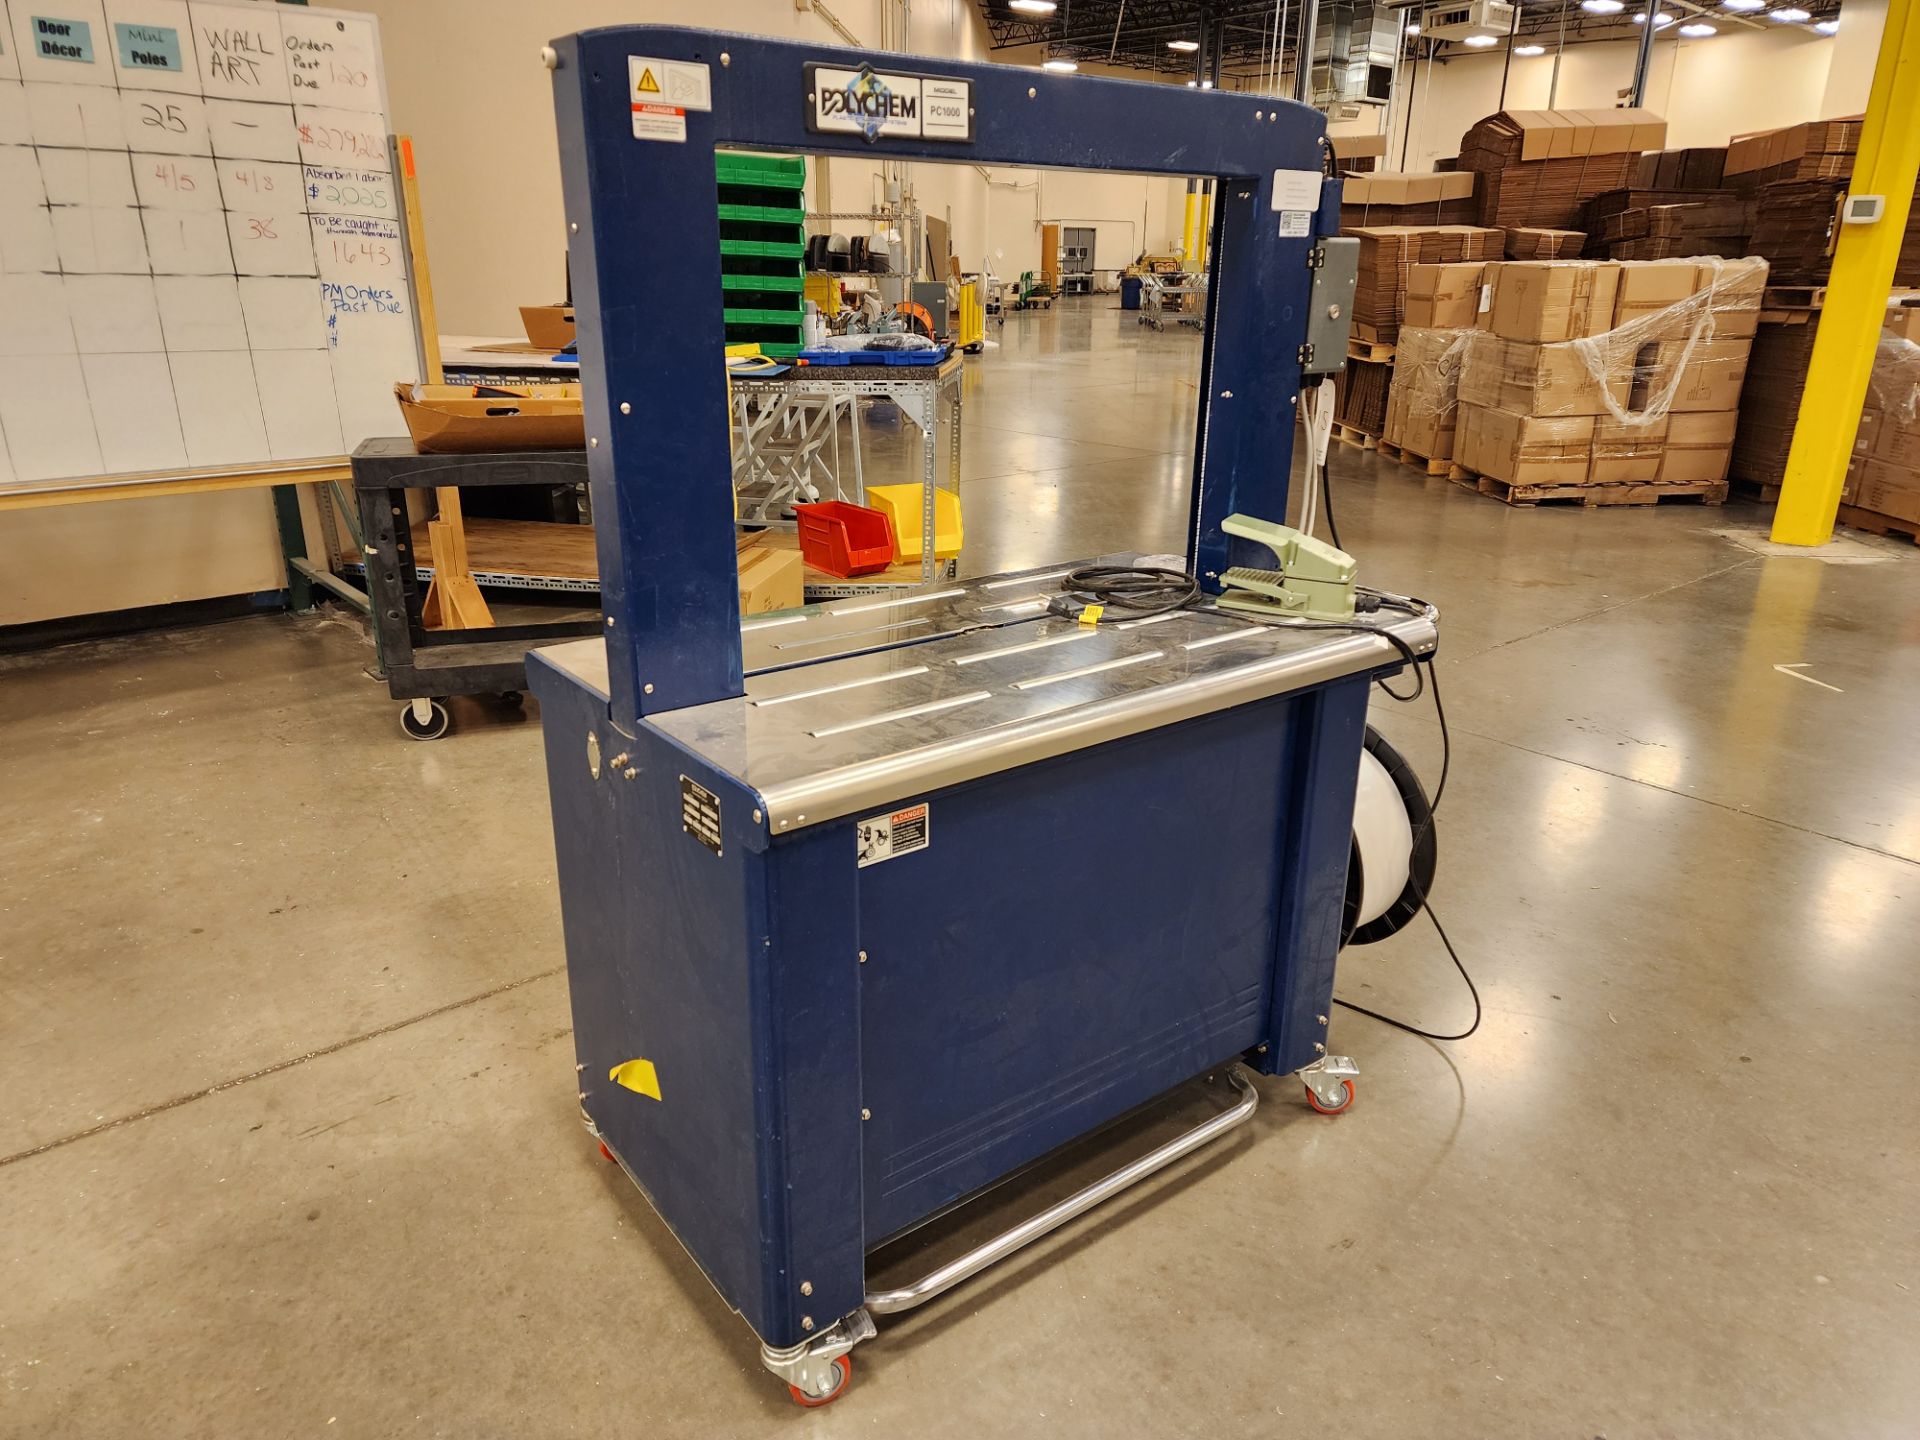 Polychem Model PC1000 Automatic Arch Strapping Machine, 88 Lb. Capacity, S/N 150143 (2020) - Image 3 of 5